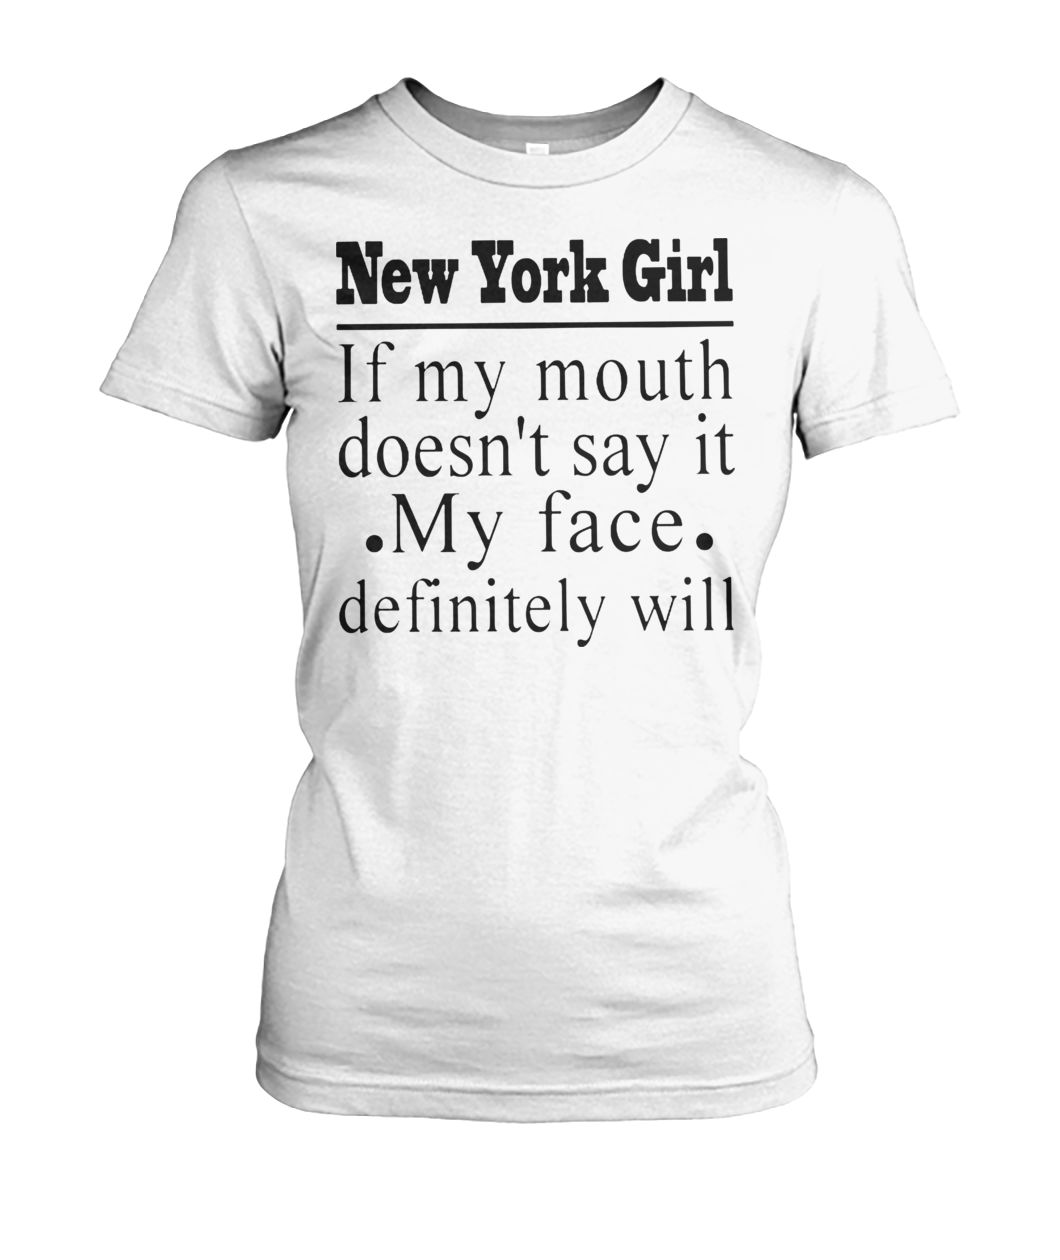 New york girl if my mouth doesn't say it my face definitely will women's crew tee